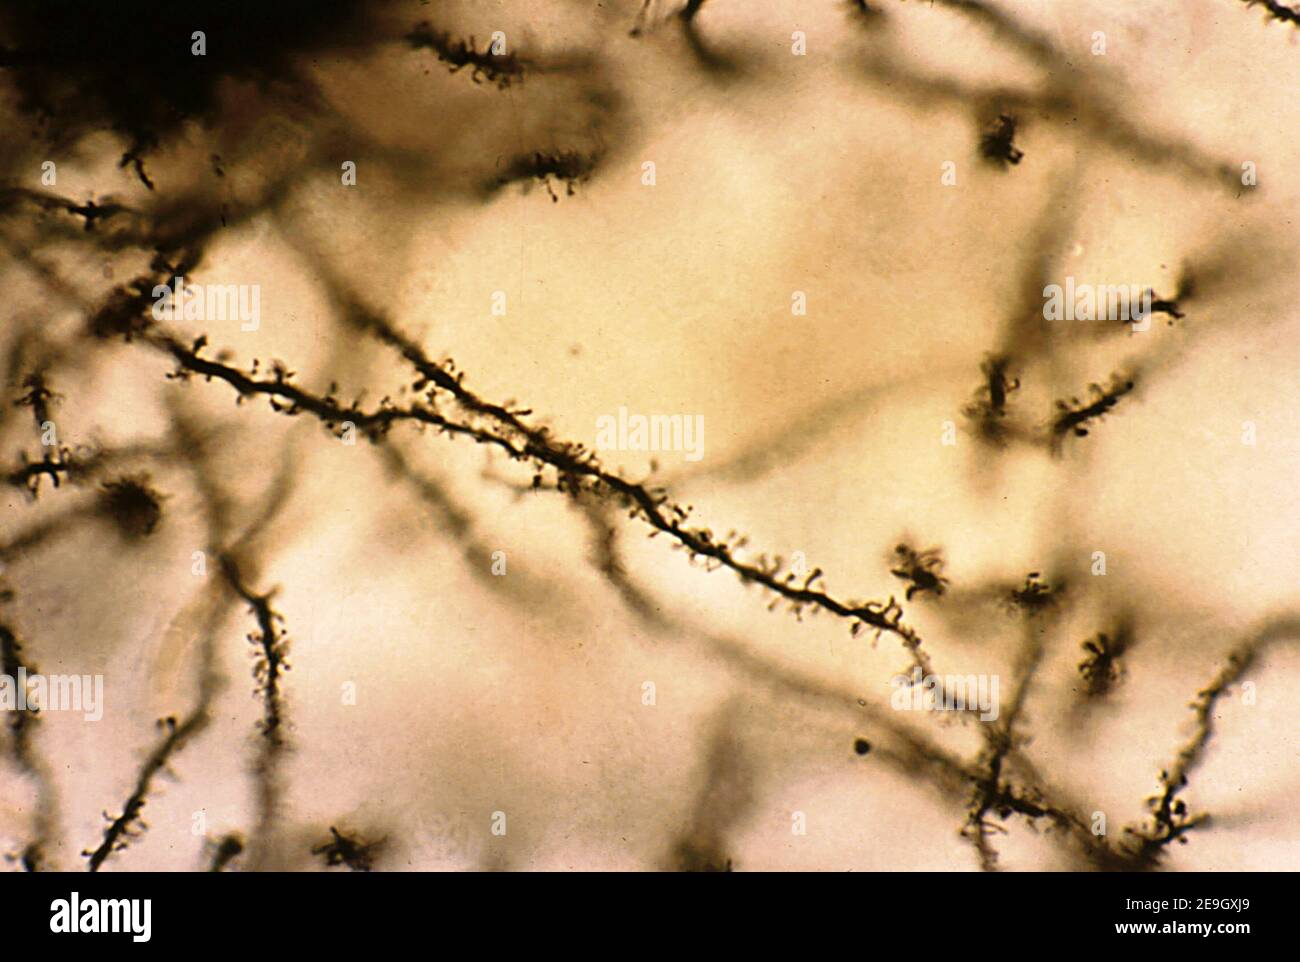 Dendrites of pyramidal cells of the cerebral cortex stained with the Golgi’s silver chromate. The dendrites have numerous spines on their surface. Stock Photo